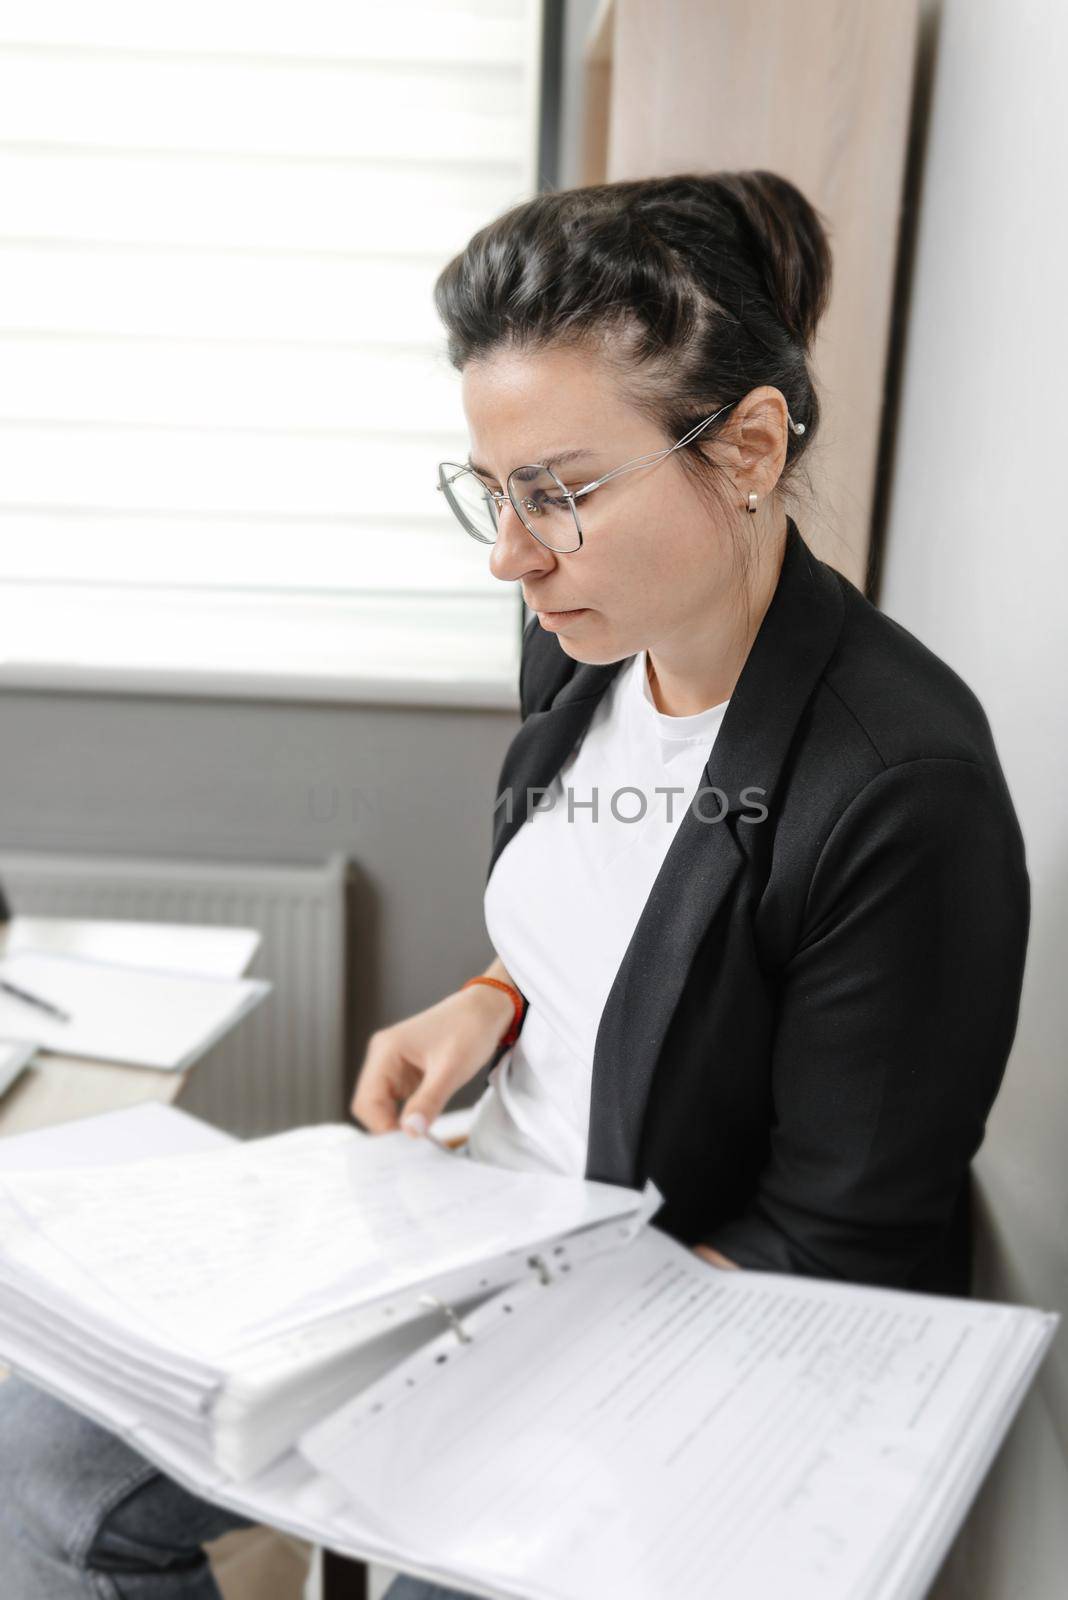 Accountant Clerk Clerk Woman. Bank counselor and auditor. Woman holding a binder of documents. Real office